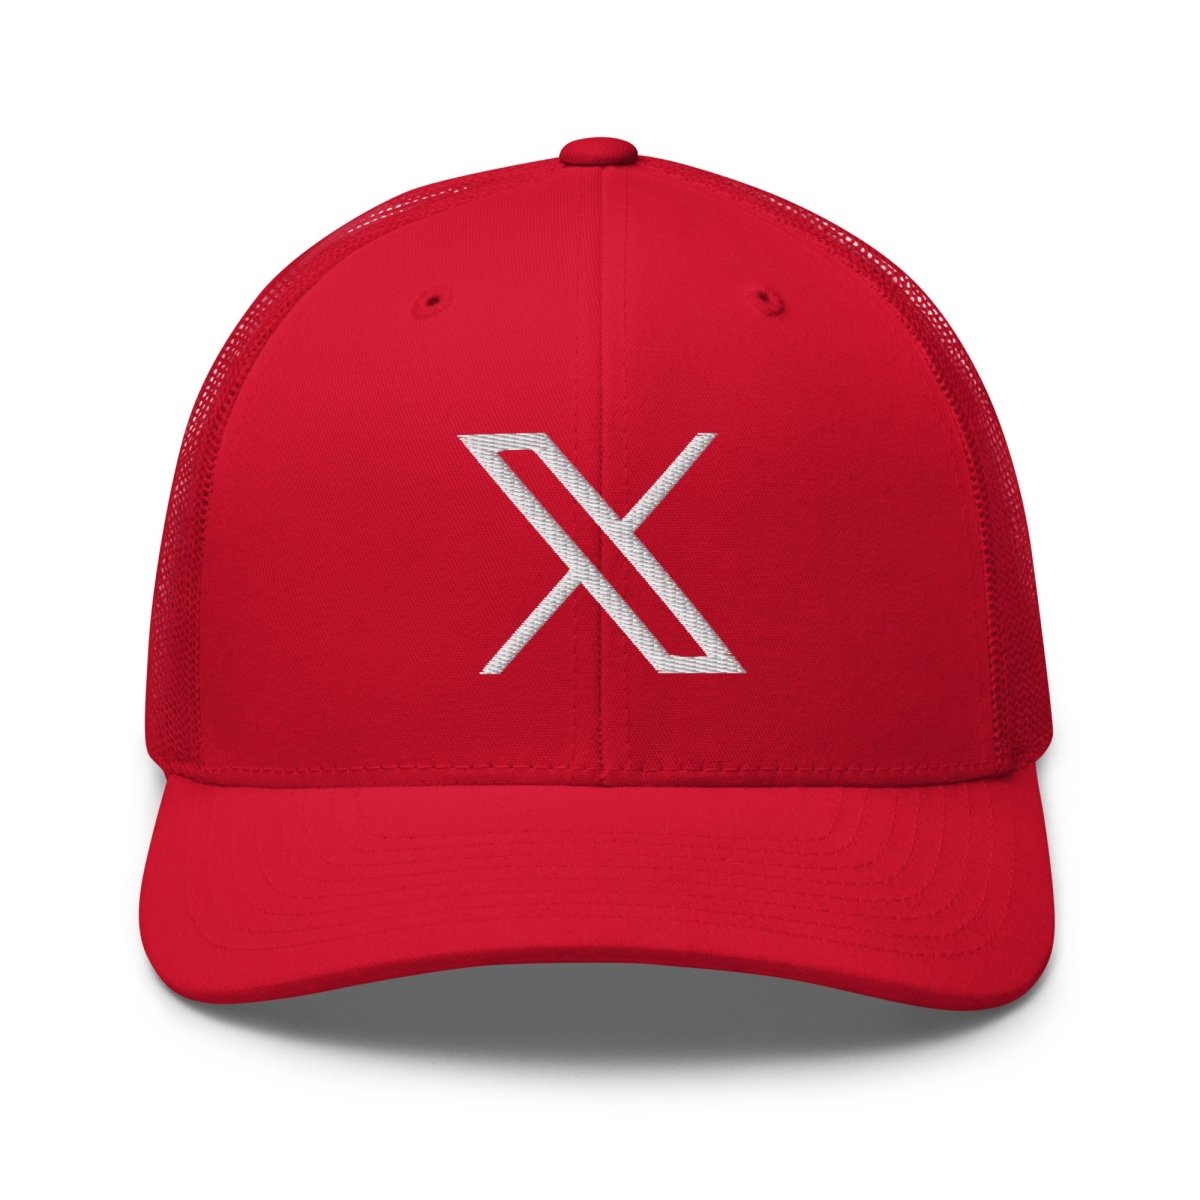 Twitter X Logo Embroidered Trucker Cap - Red - AI Store